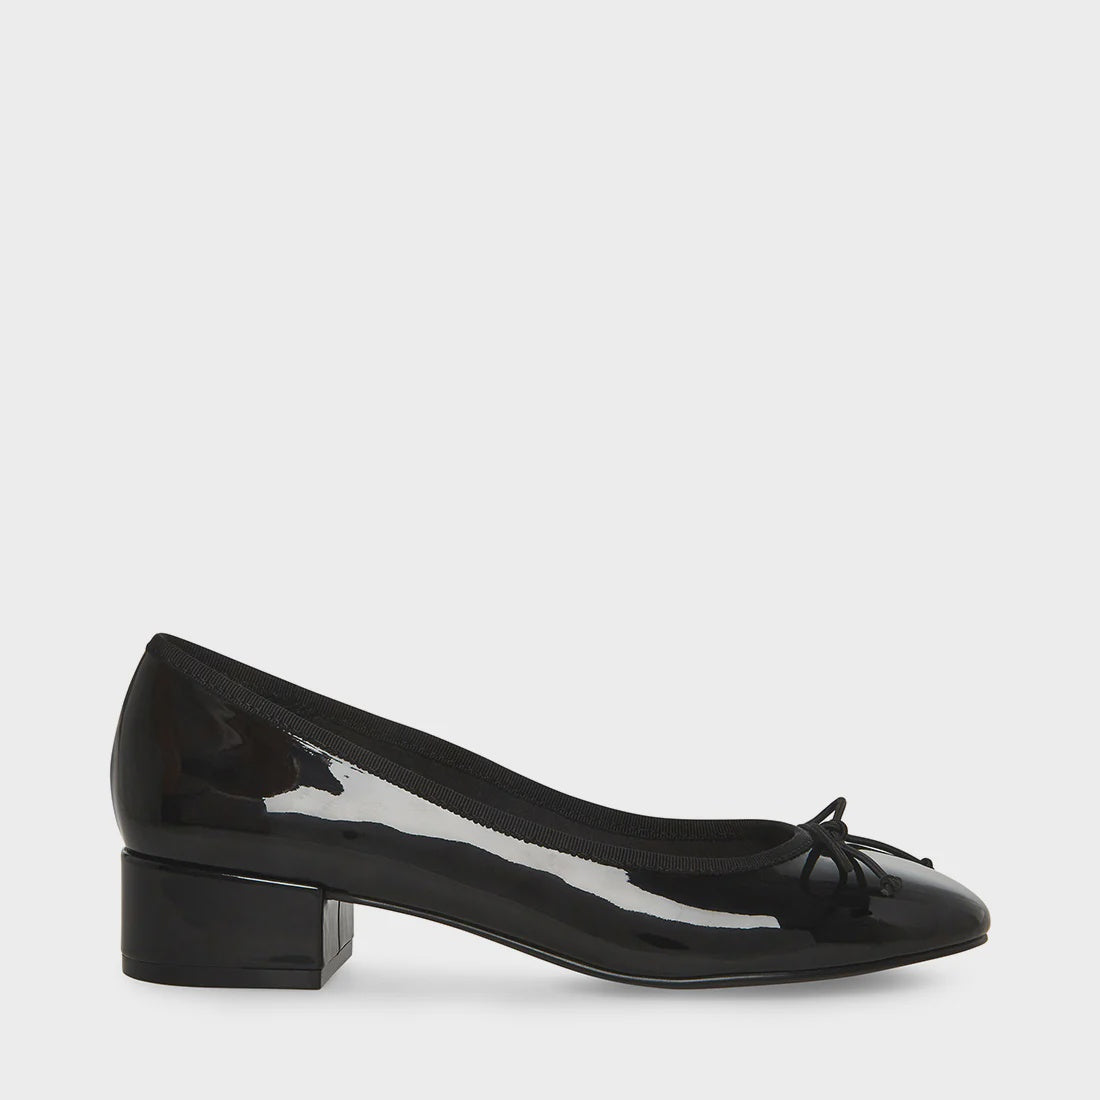 STEVE MADDEN - CHERISH PUMP IN BLACK PATENT SYNTHETIC LEATHER